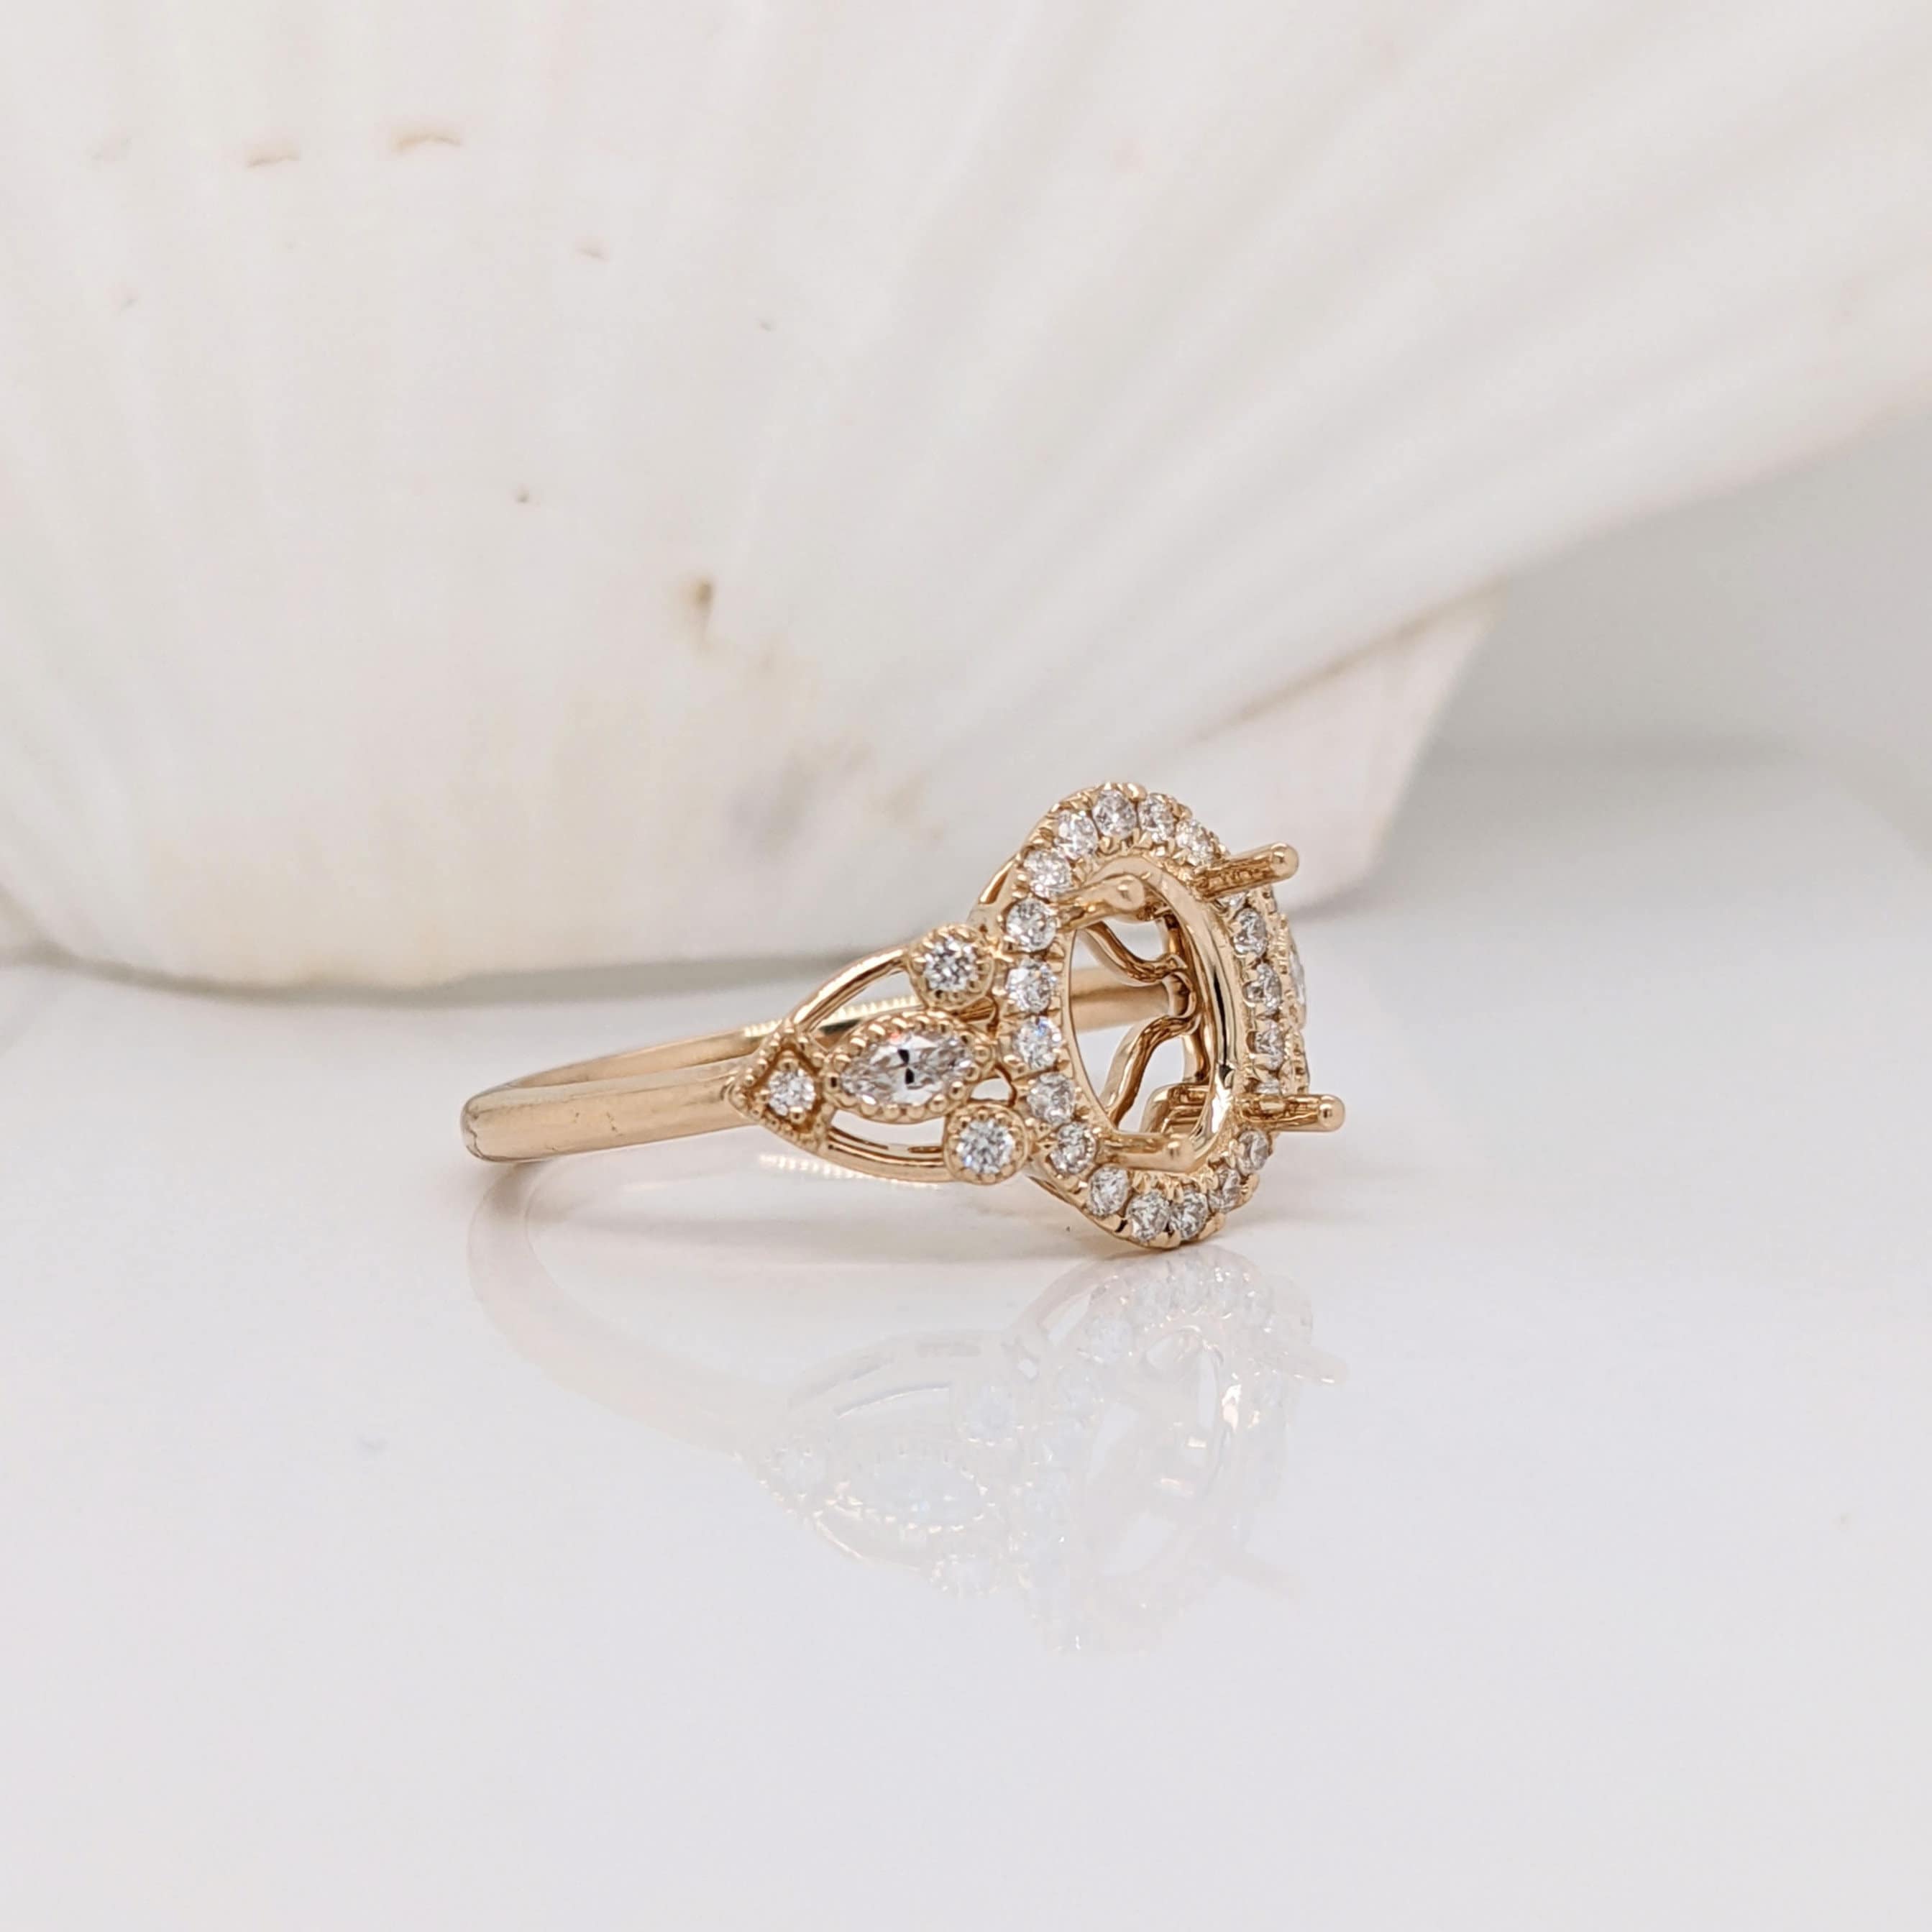 Vintage Style Ring Semi Mount in Solid 14k Gold w Natural Diamond Halo | Migrain | Design Detail | Oval Cut | Custom Sizes | Customizable